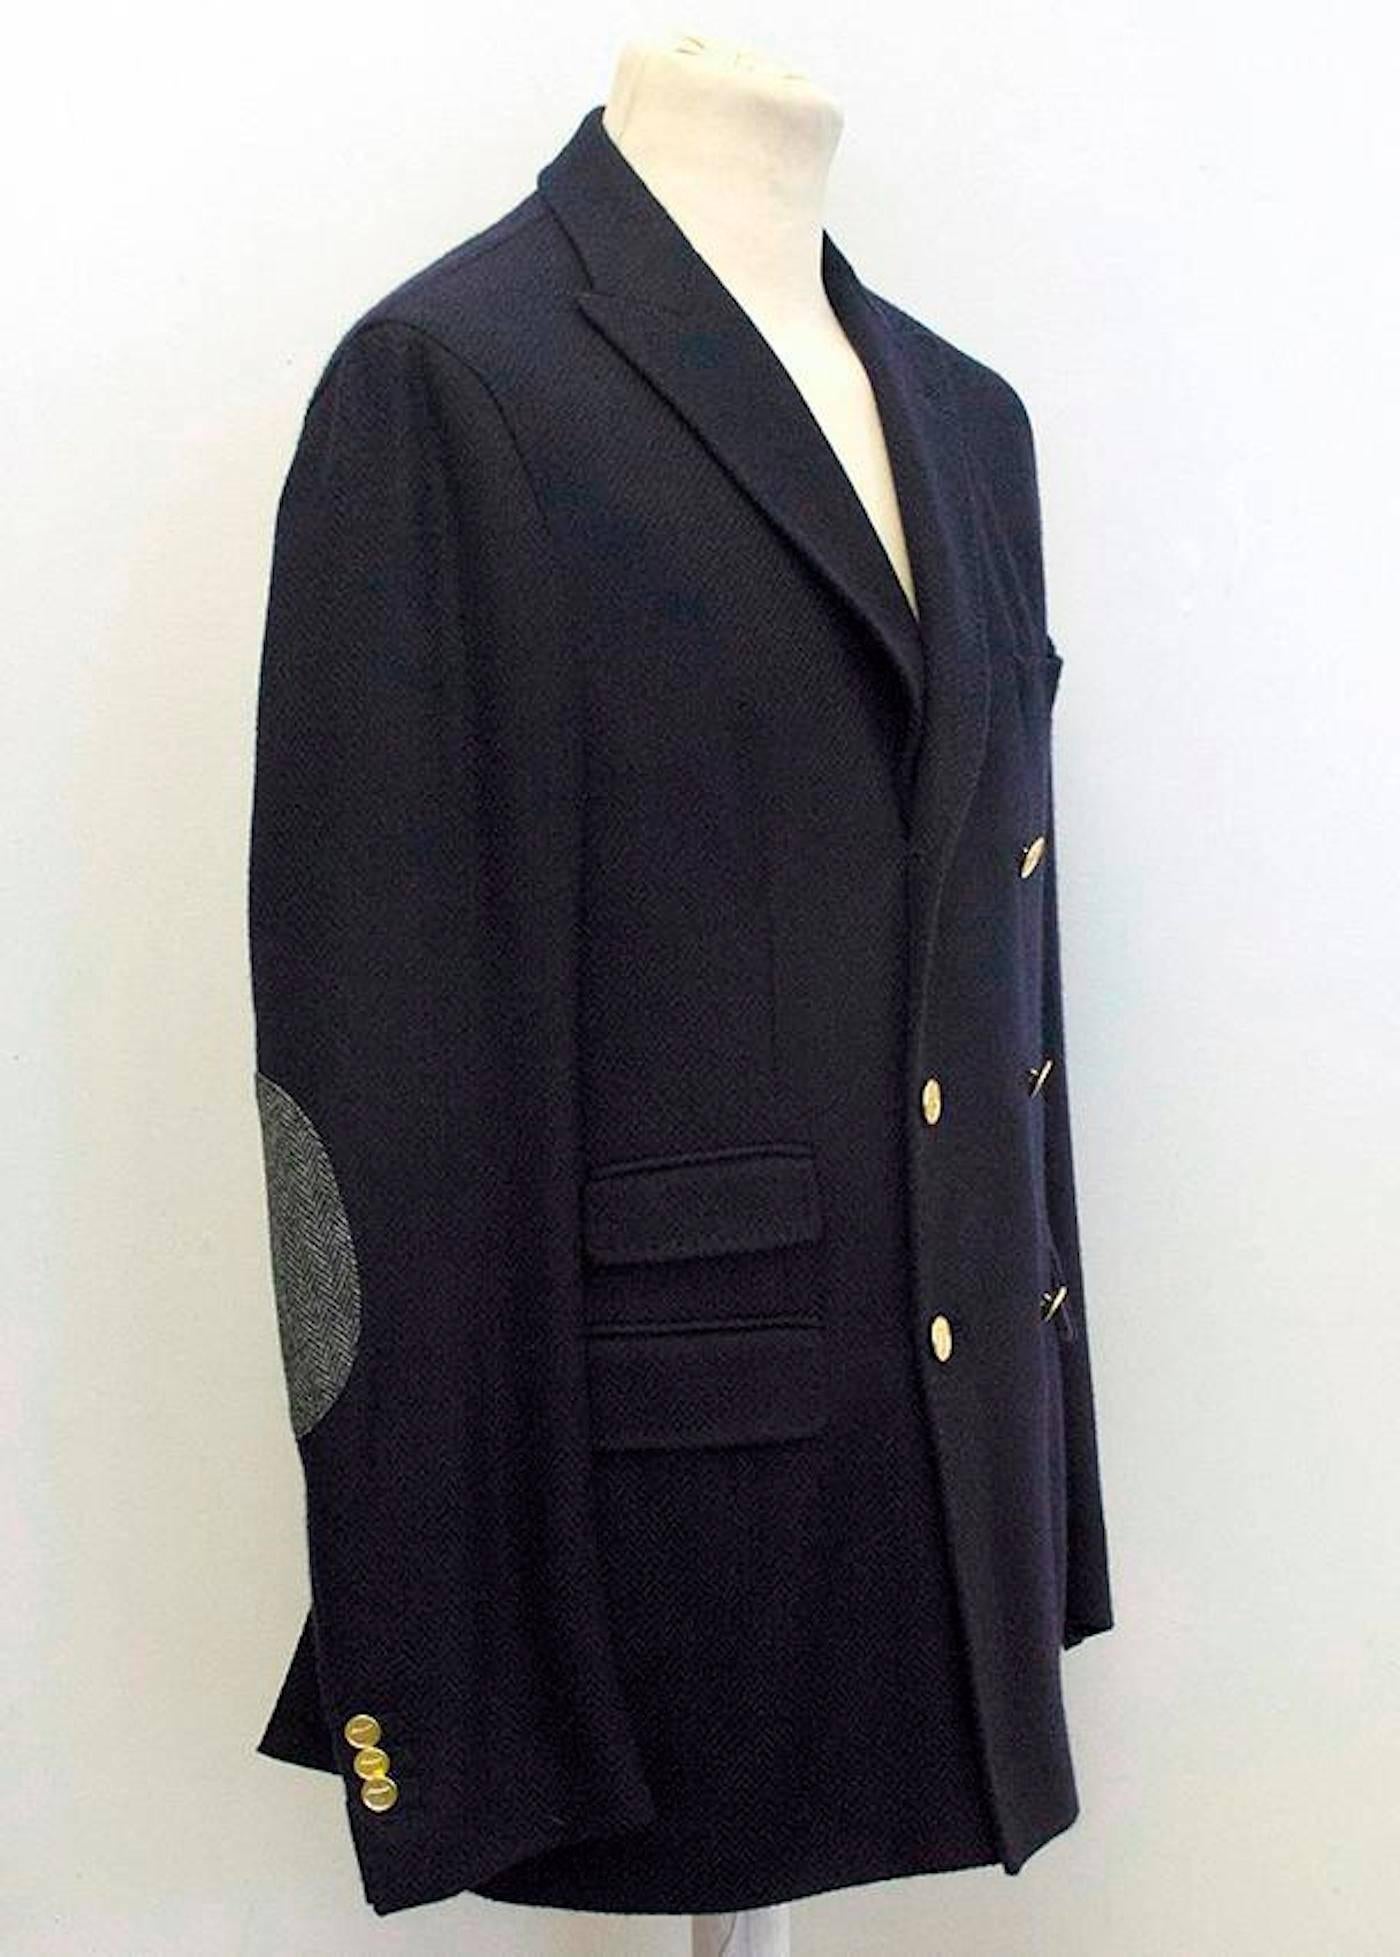 Wool and cashmere blend navy blazer with gold buttons. 

New without tags in perfect condition 10/10. 

Approx. 
66cm Sleeve 
78cm Length 
48cm Shoulder
54cm Chest

US size XL